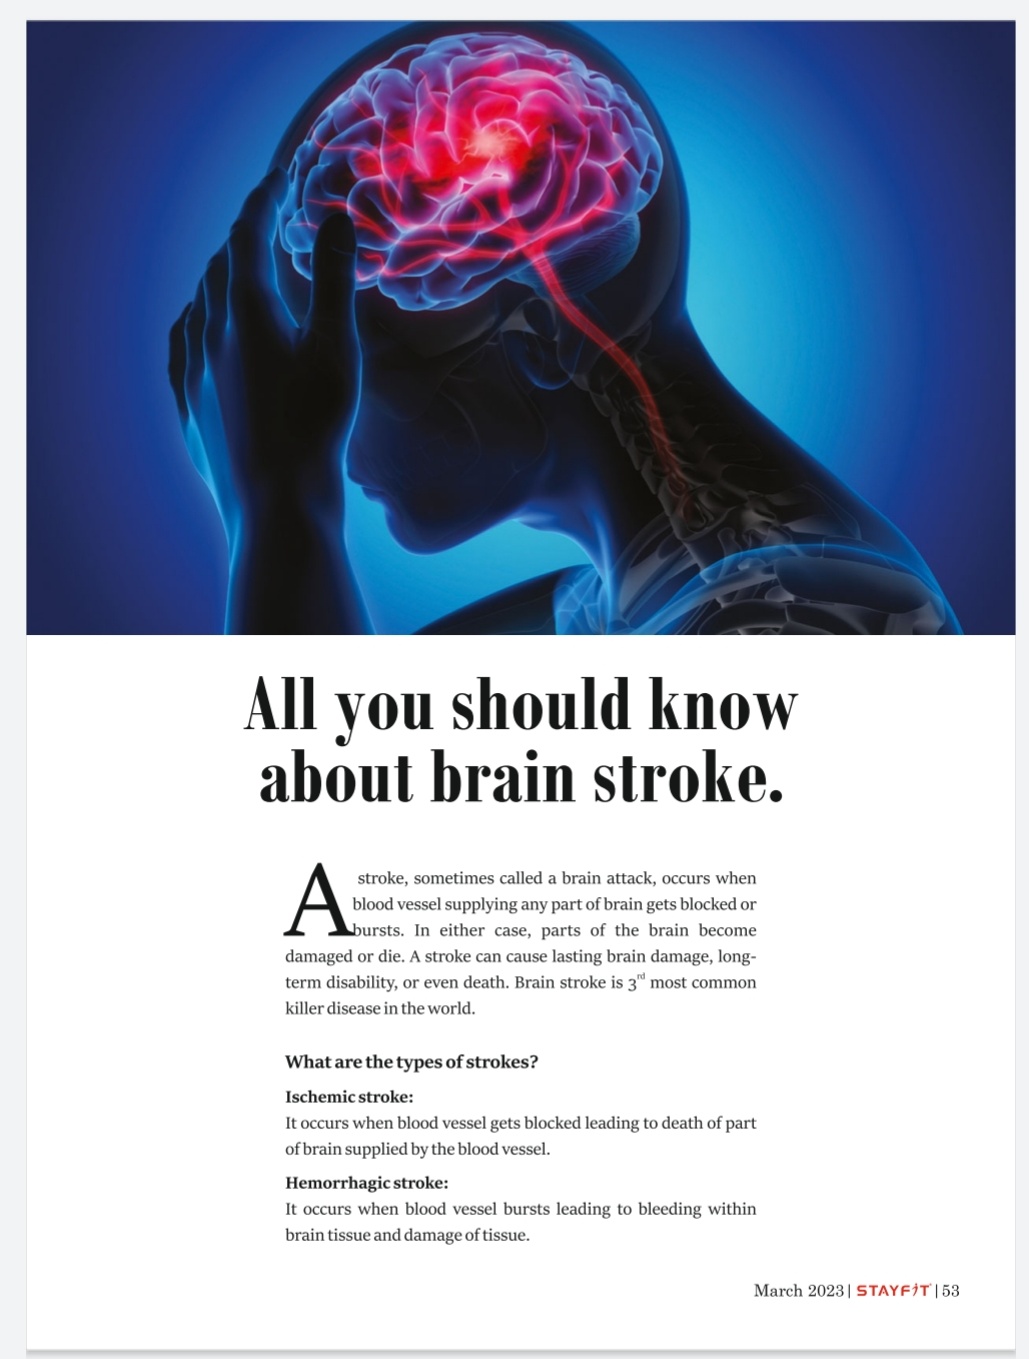 All vou should know about brain stroke